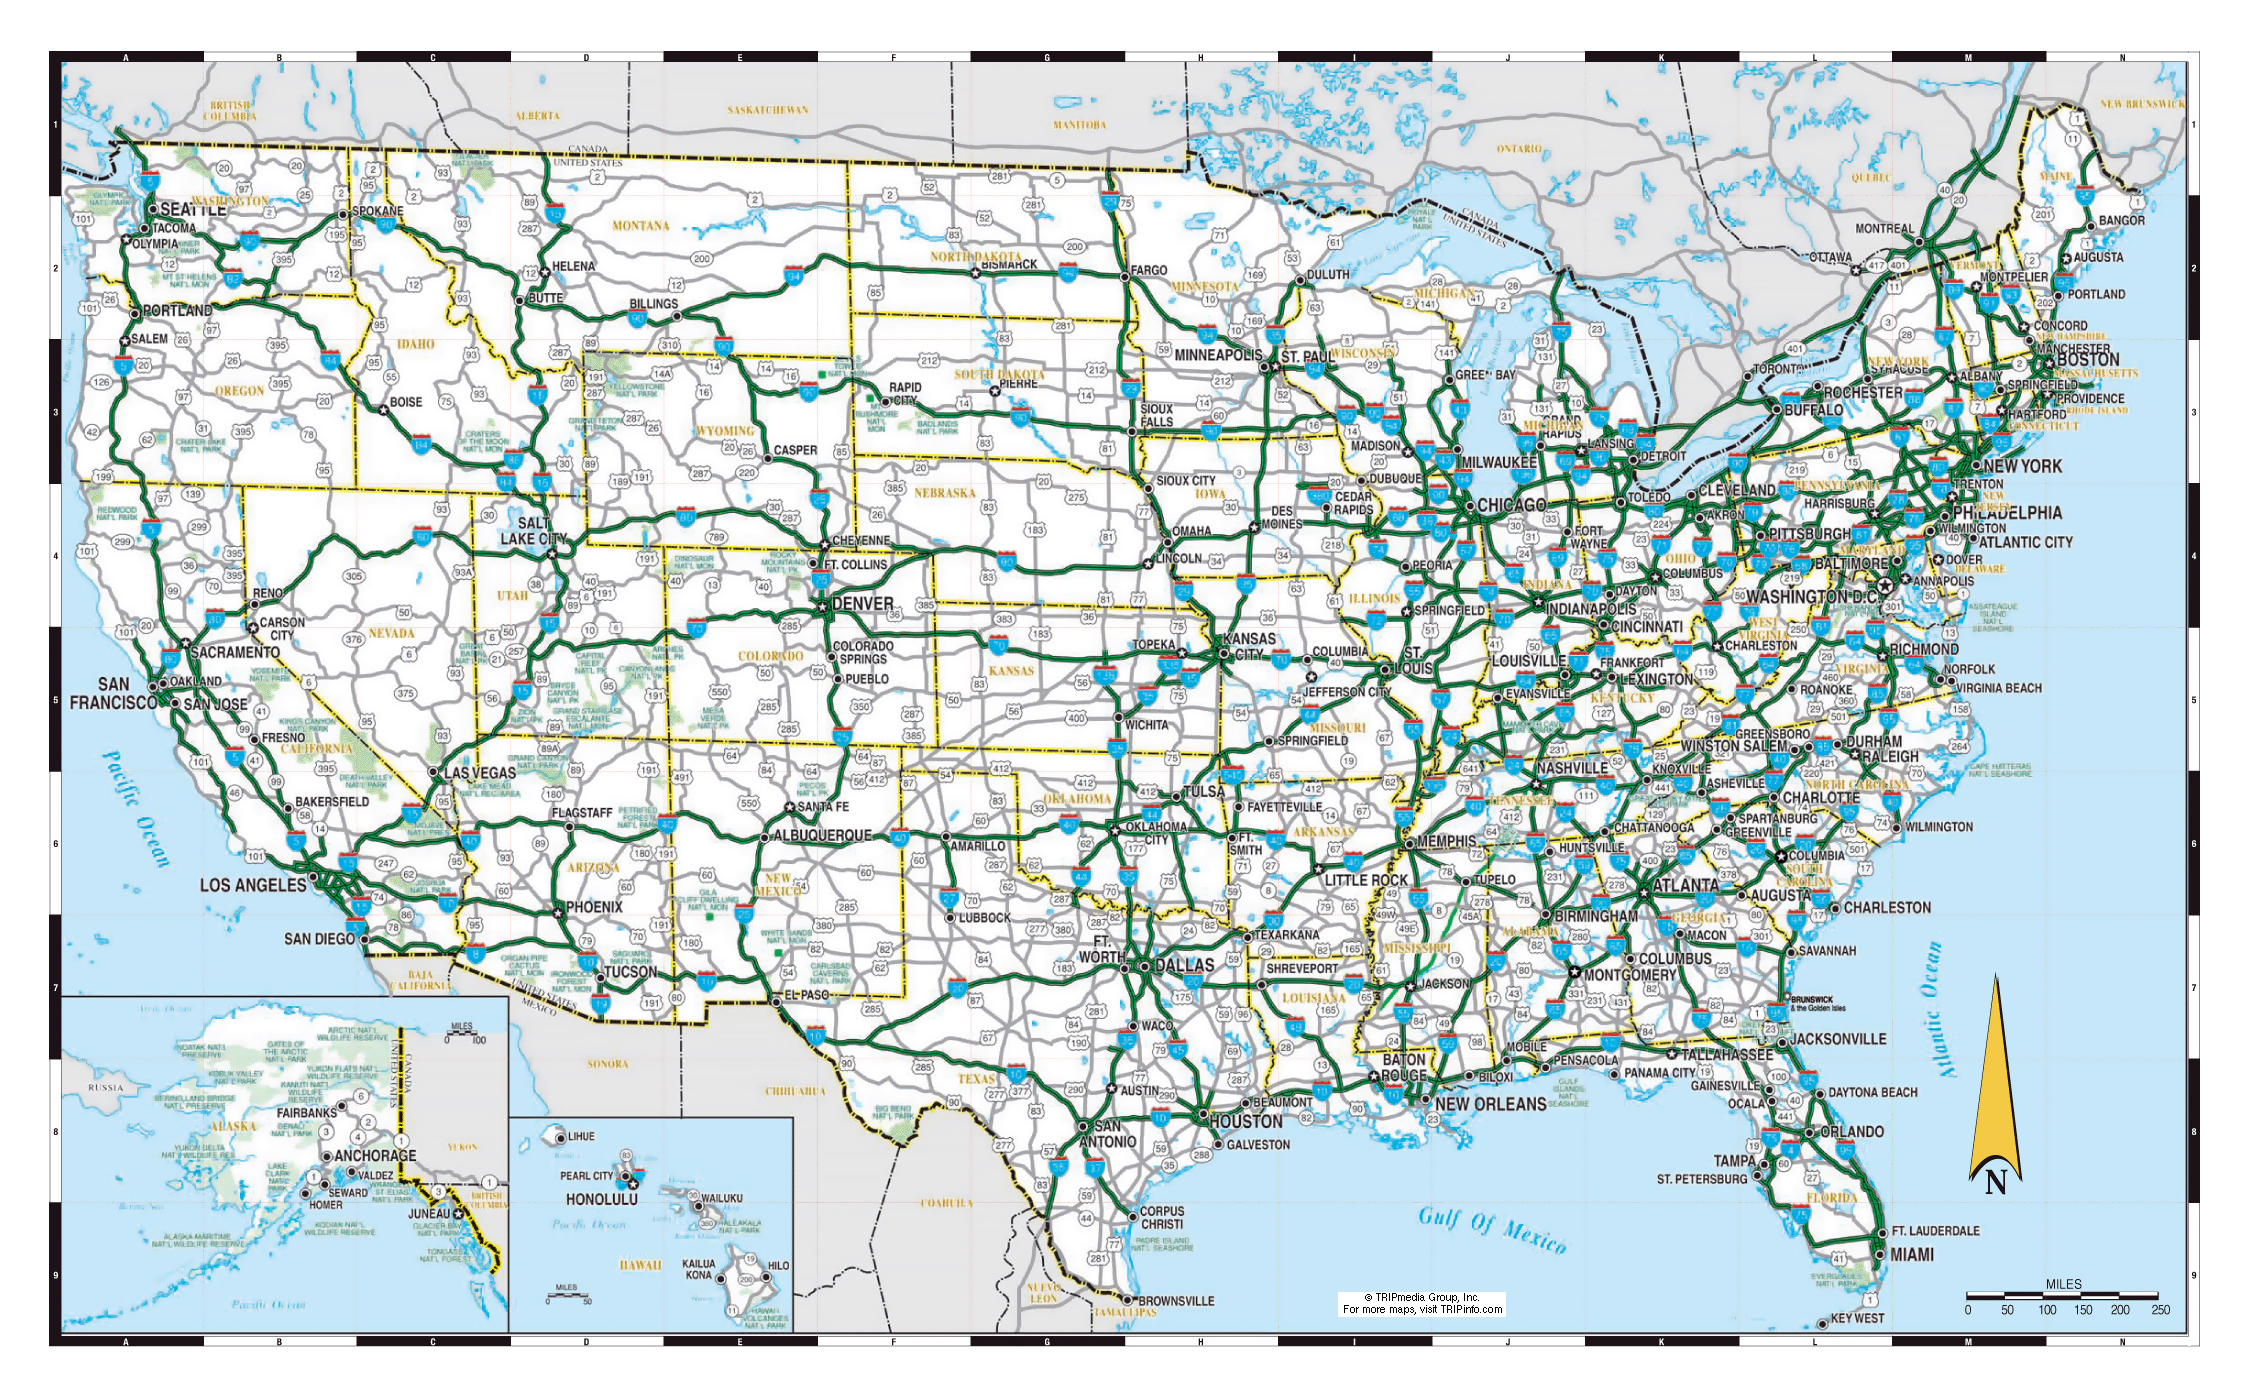 Highway Map Of United States Of America Large highways map of the USA | USA | Maps of the USA | Maps 